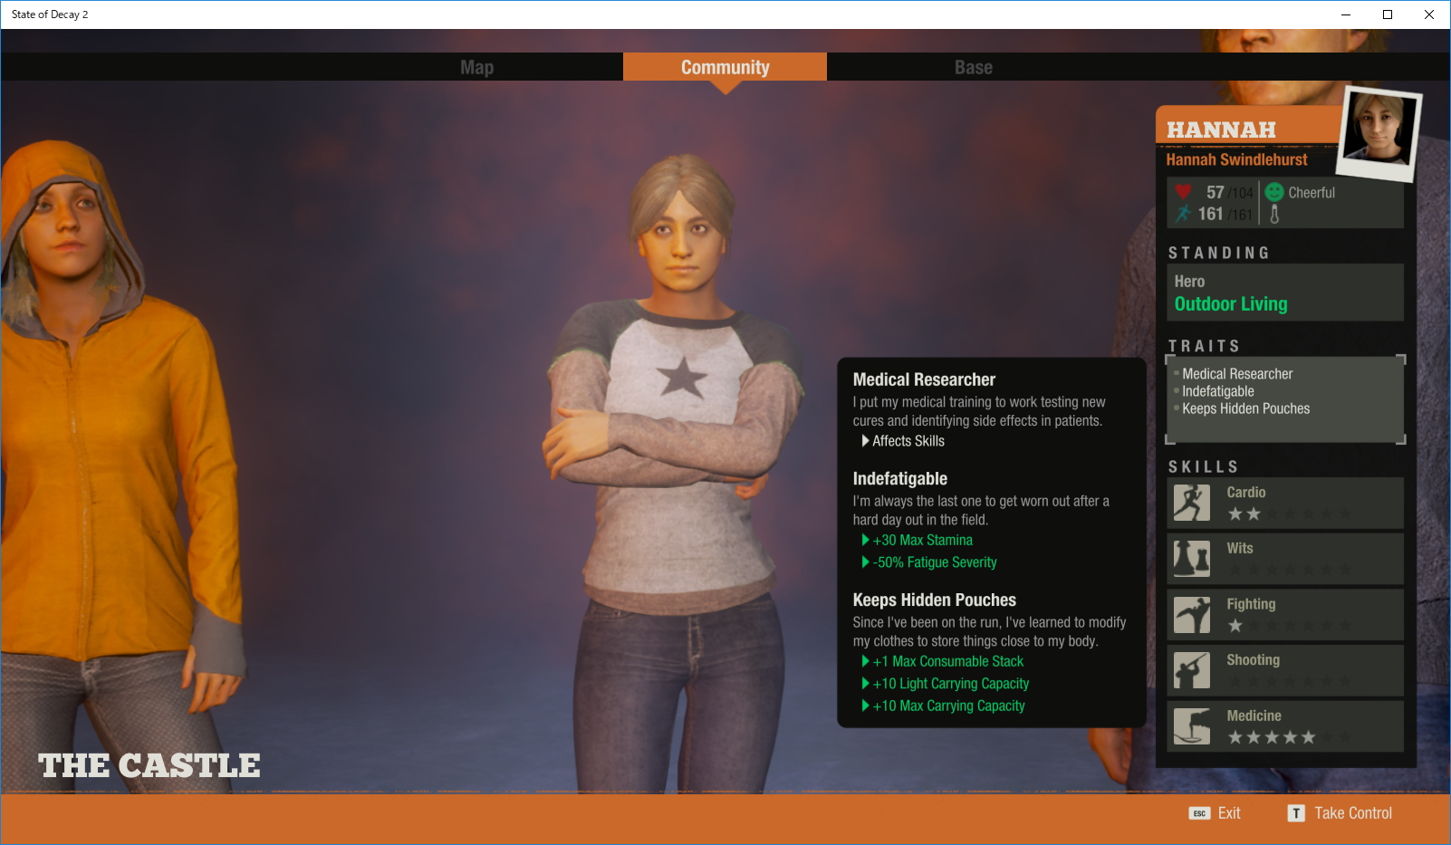 State of Decay - YOSE Day One Edition Trainer (+24) [1.0 (15.11